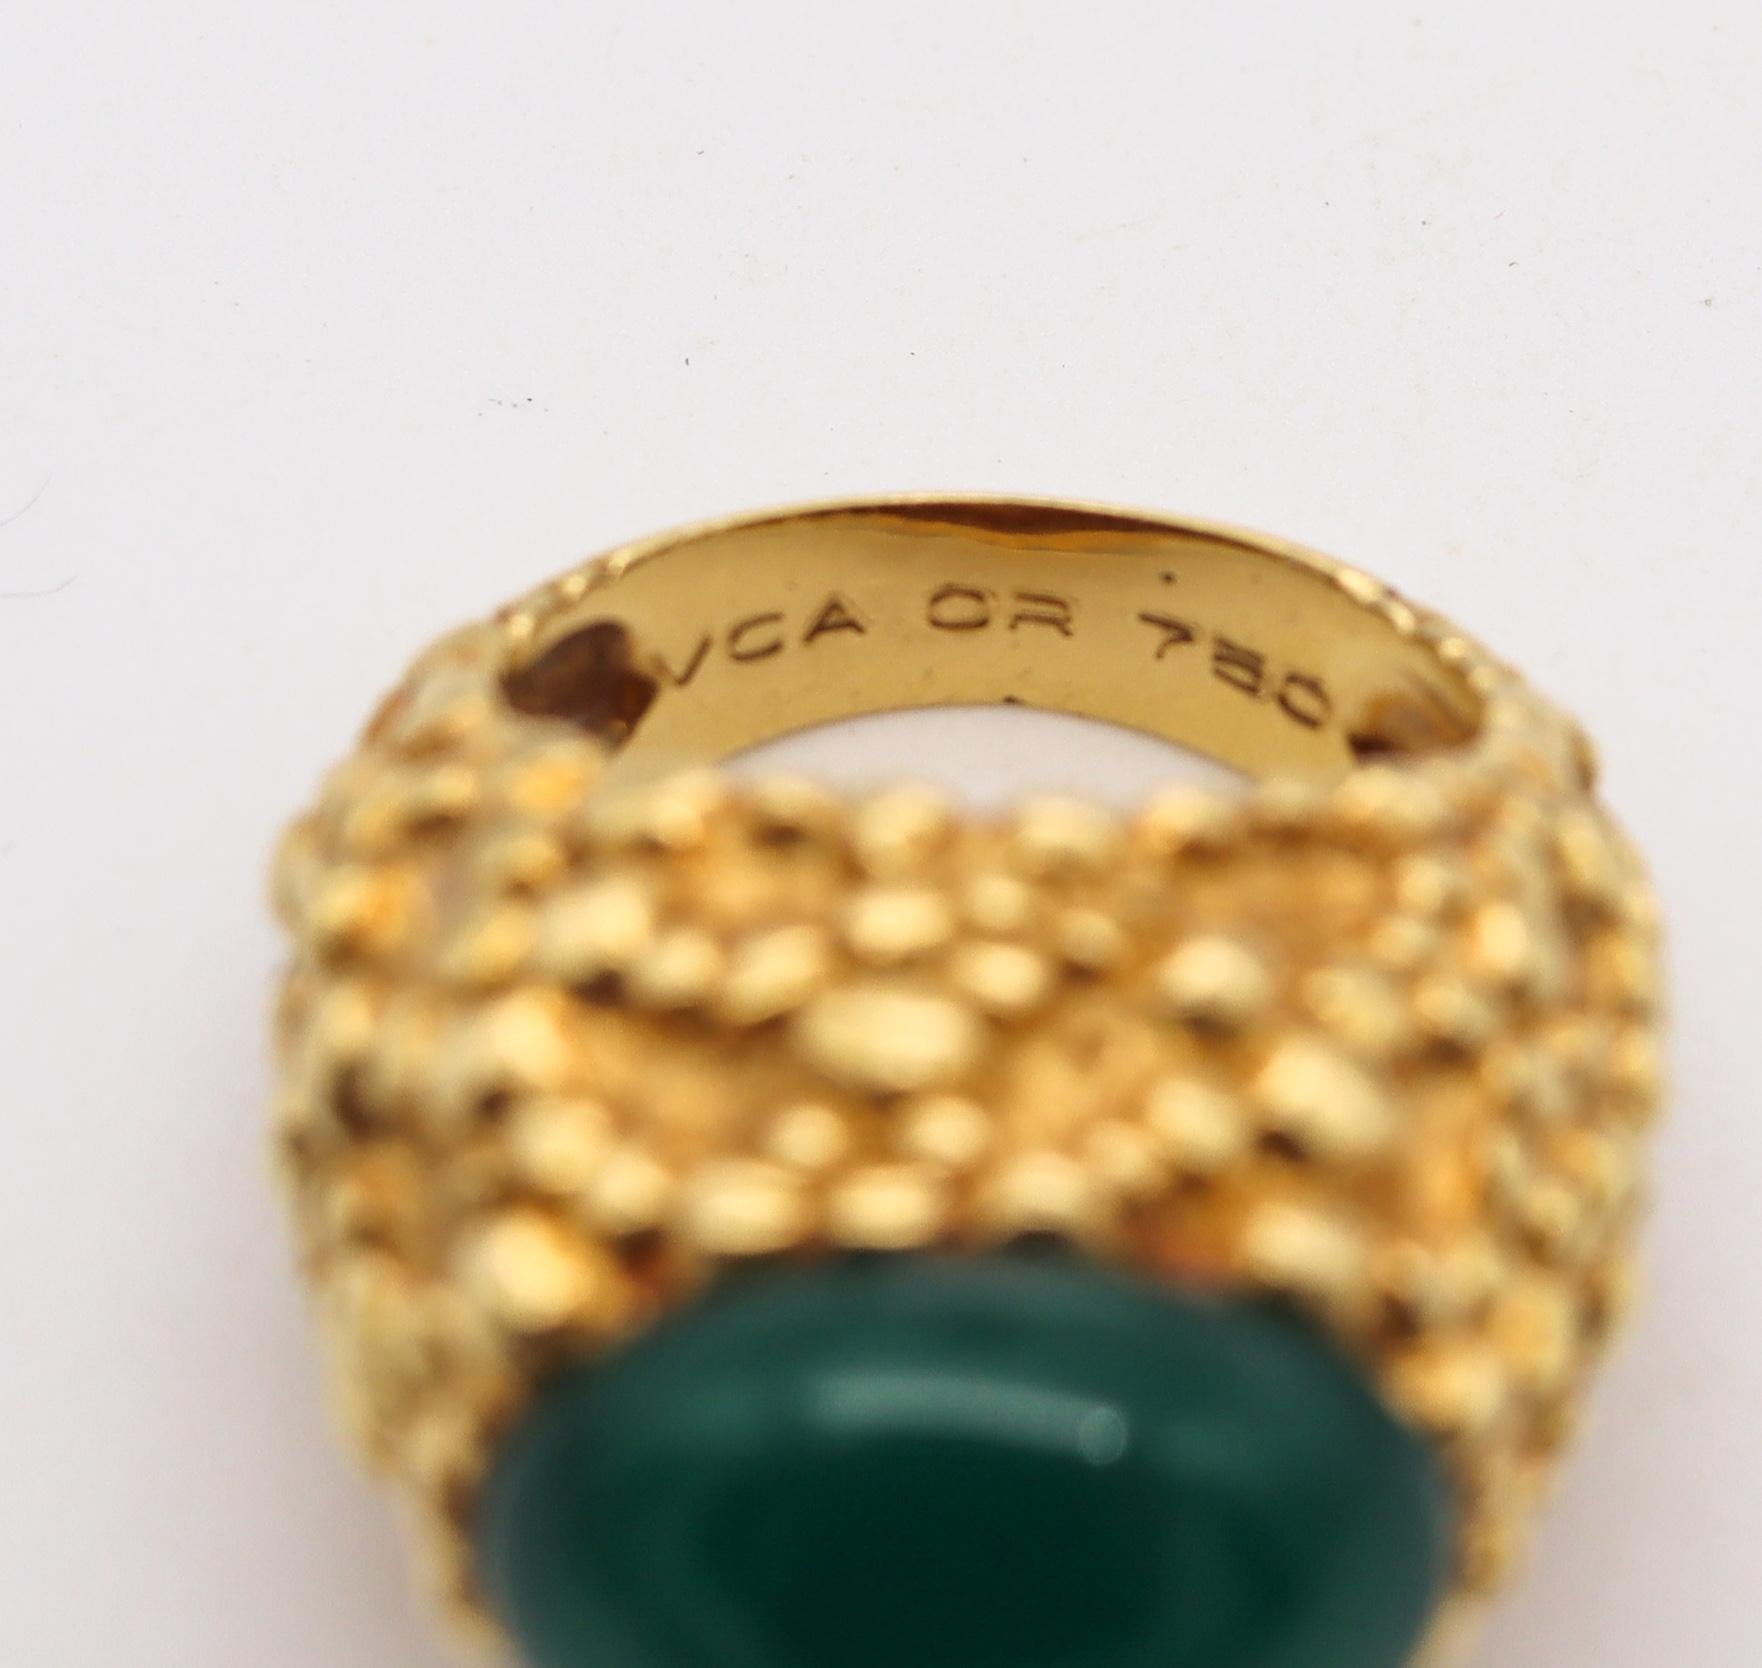 A cocktail ring designed by Van Cleef & Arpels.

Gorgeous and elegant vintage piece made in Paris France by the jewelry house of Van Cleef & Arpels, back in the 1970's. It was crafted in solid yellow gold of 18 karats, with the entire surface